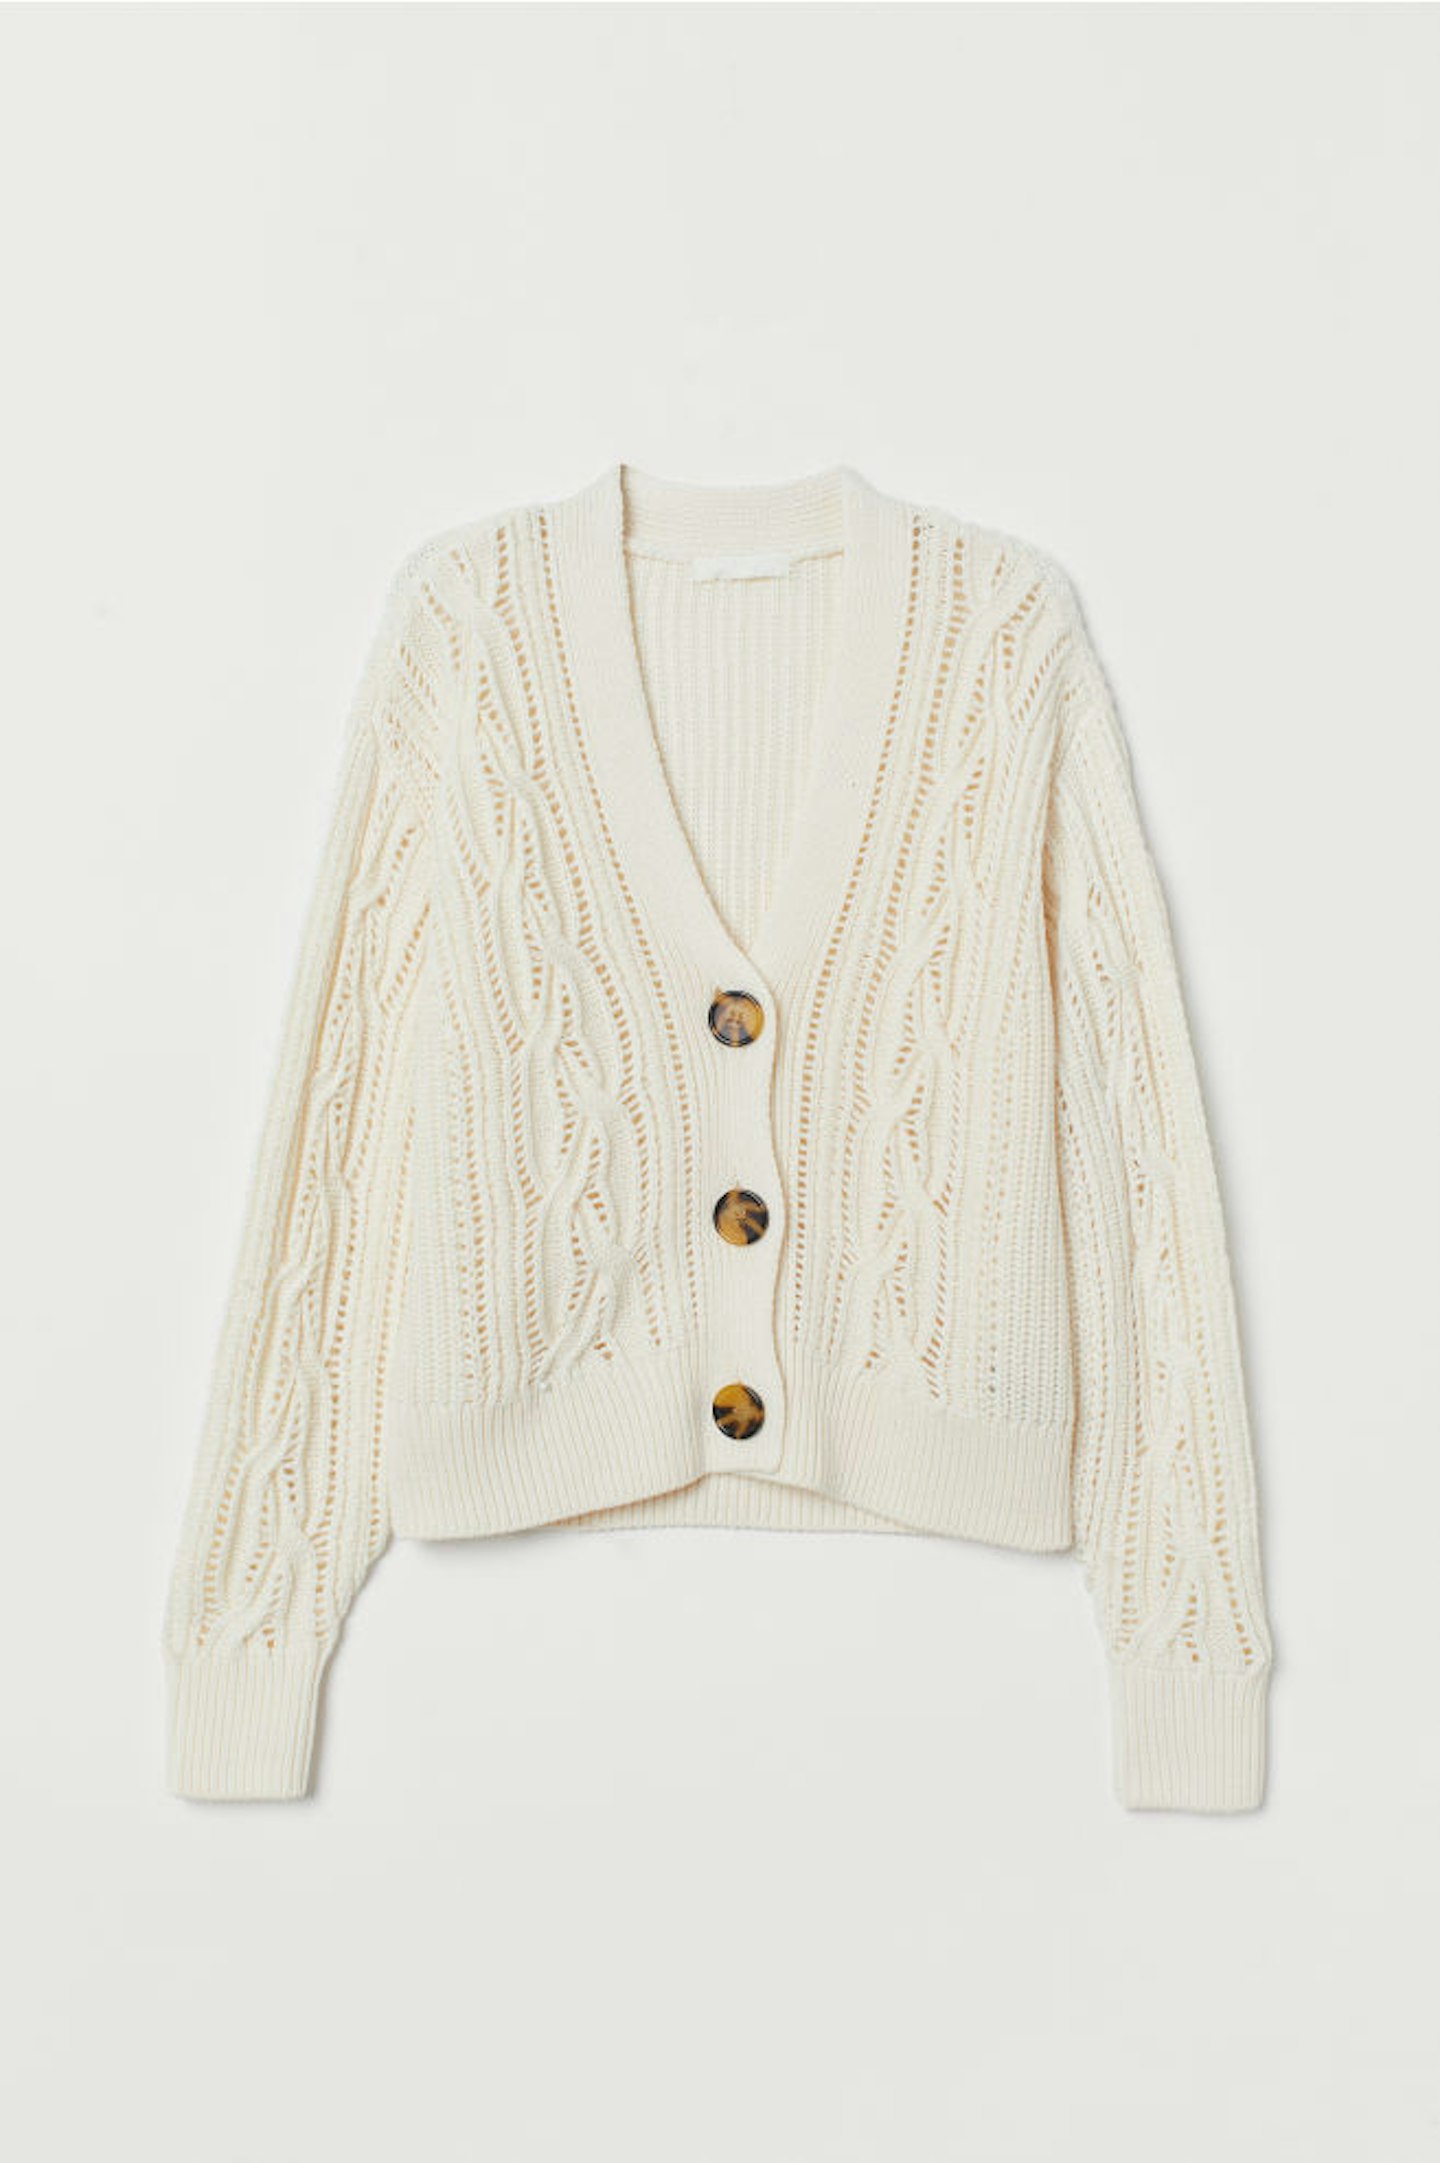 14 H&M Items For All The Minimalists Out There | Fashion | Grazia